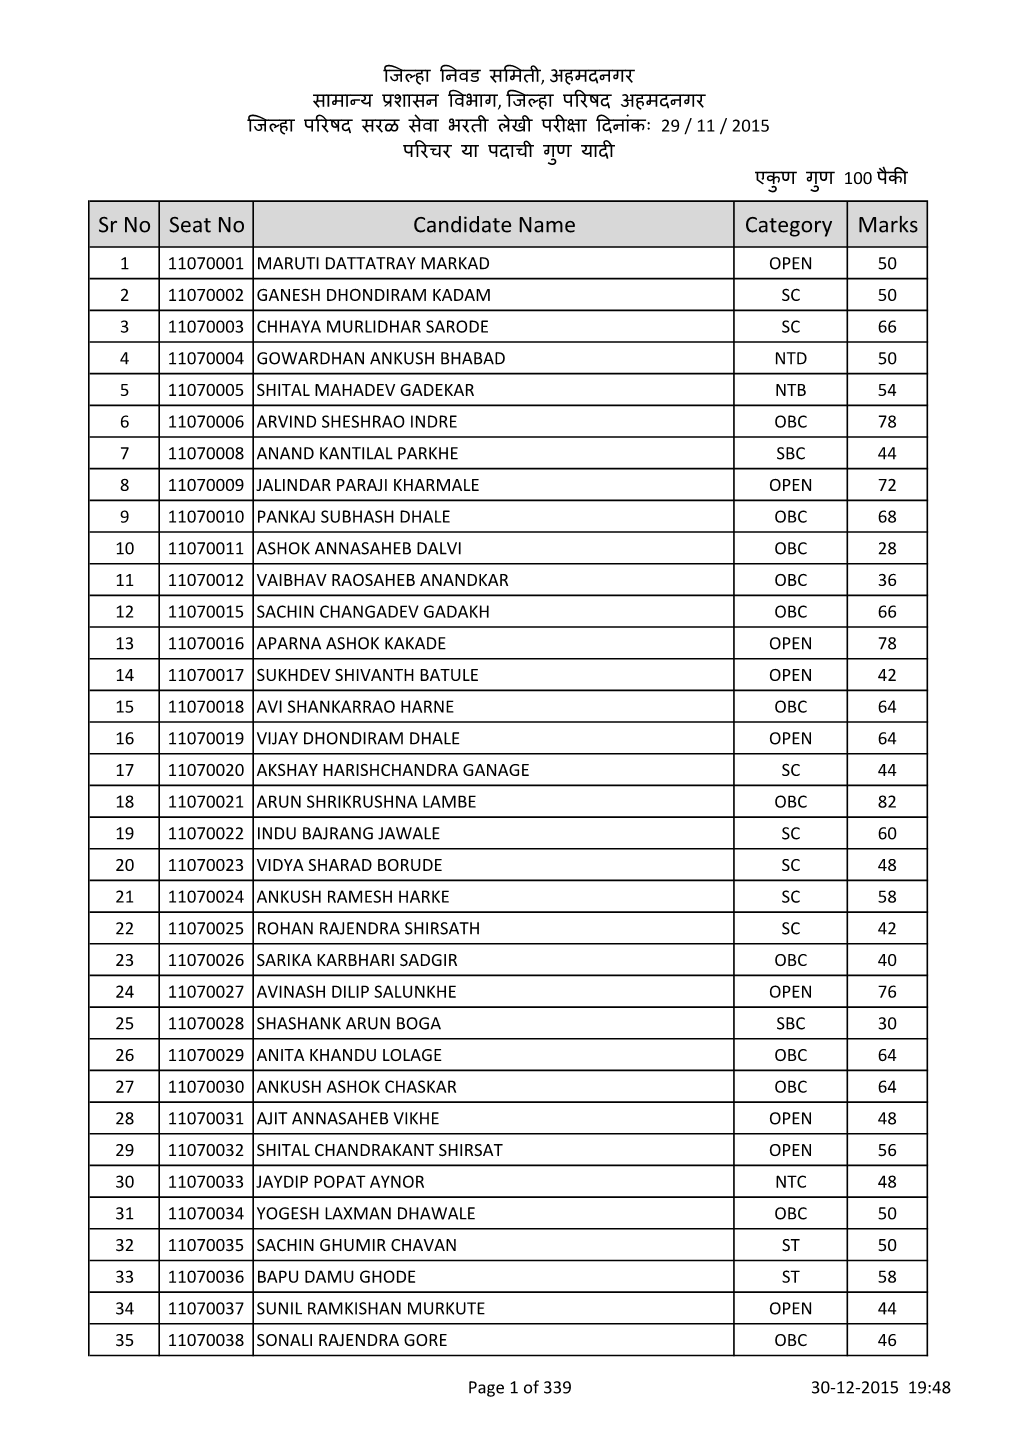 Sr No Seat No Candidate Name Category Marks